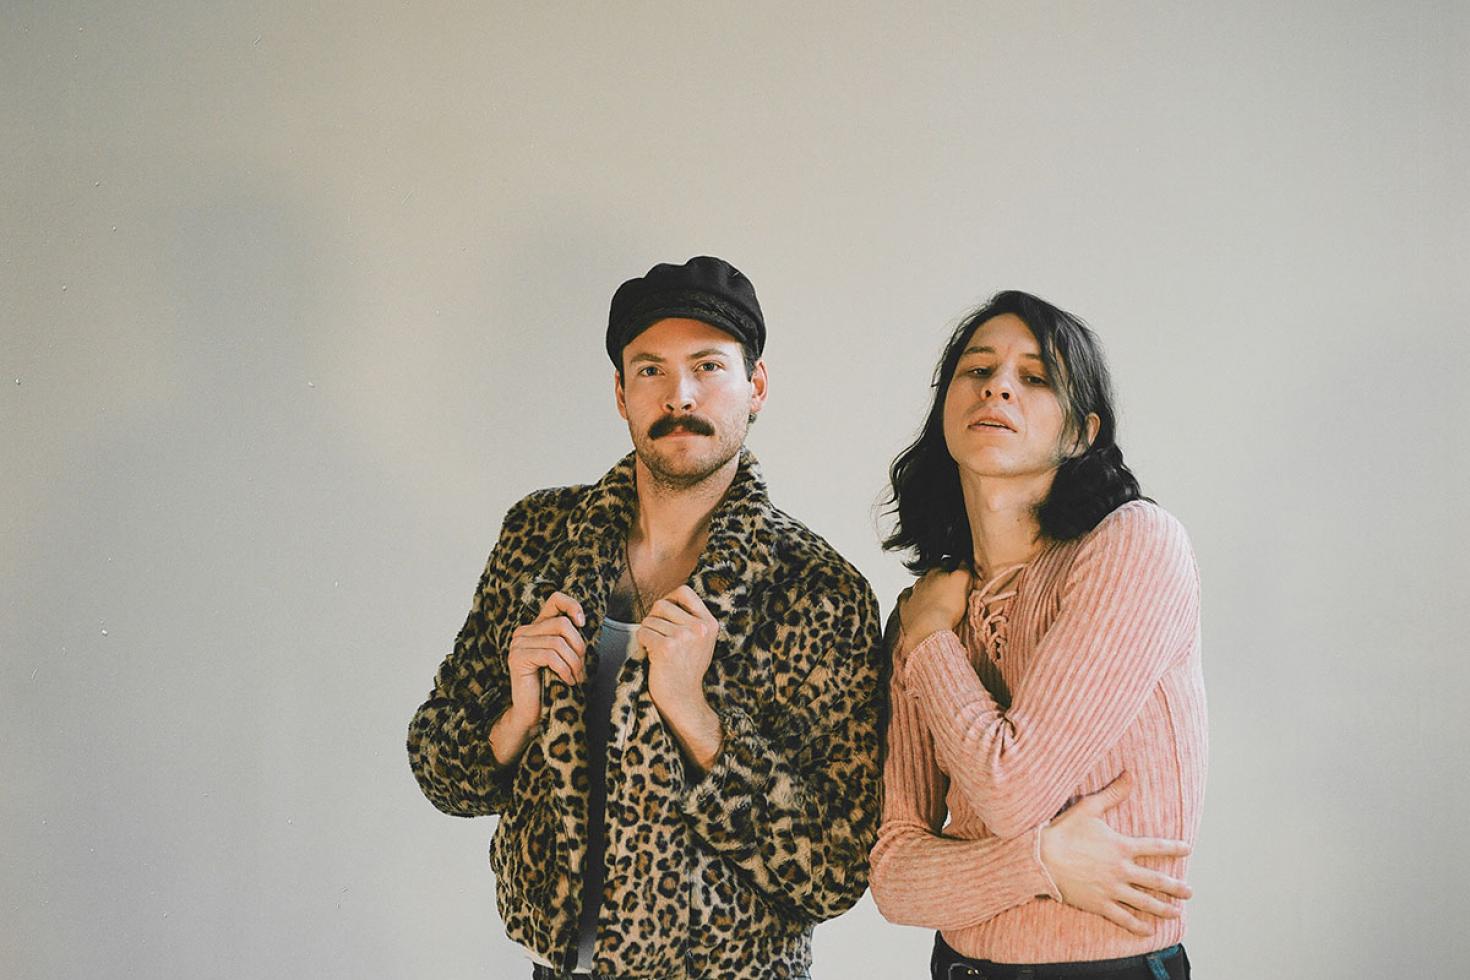 PREMIERE: Acid Tongue share video for new single 'All Out Of Time' (ft. Calvin Love)